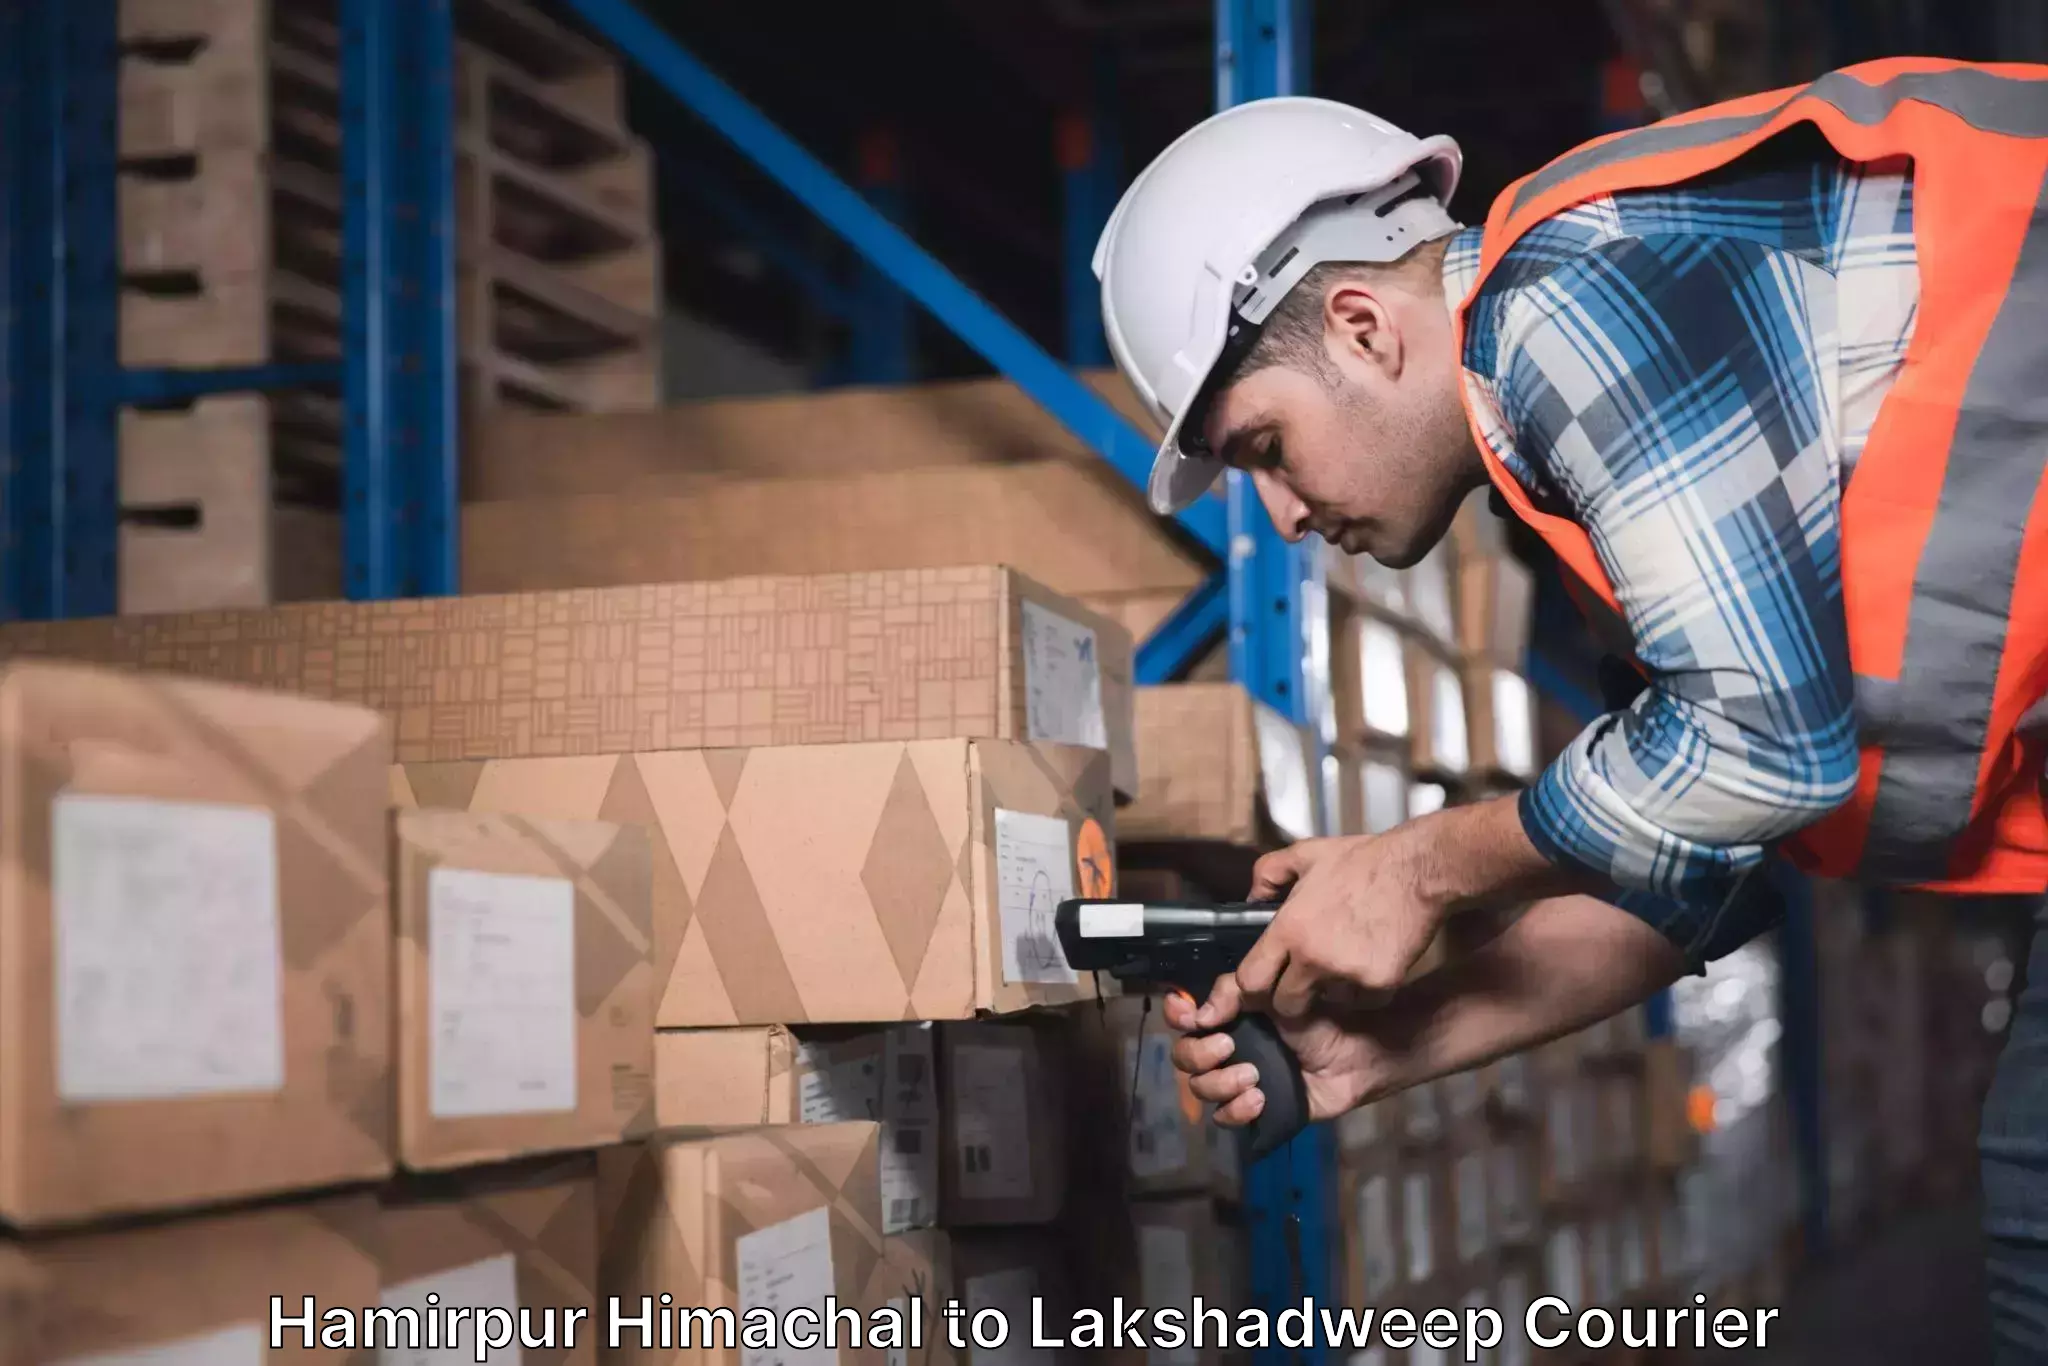 24/7 shipping services Hamirpur Himachal to Lakshadweep